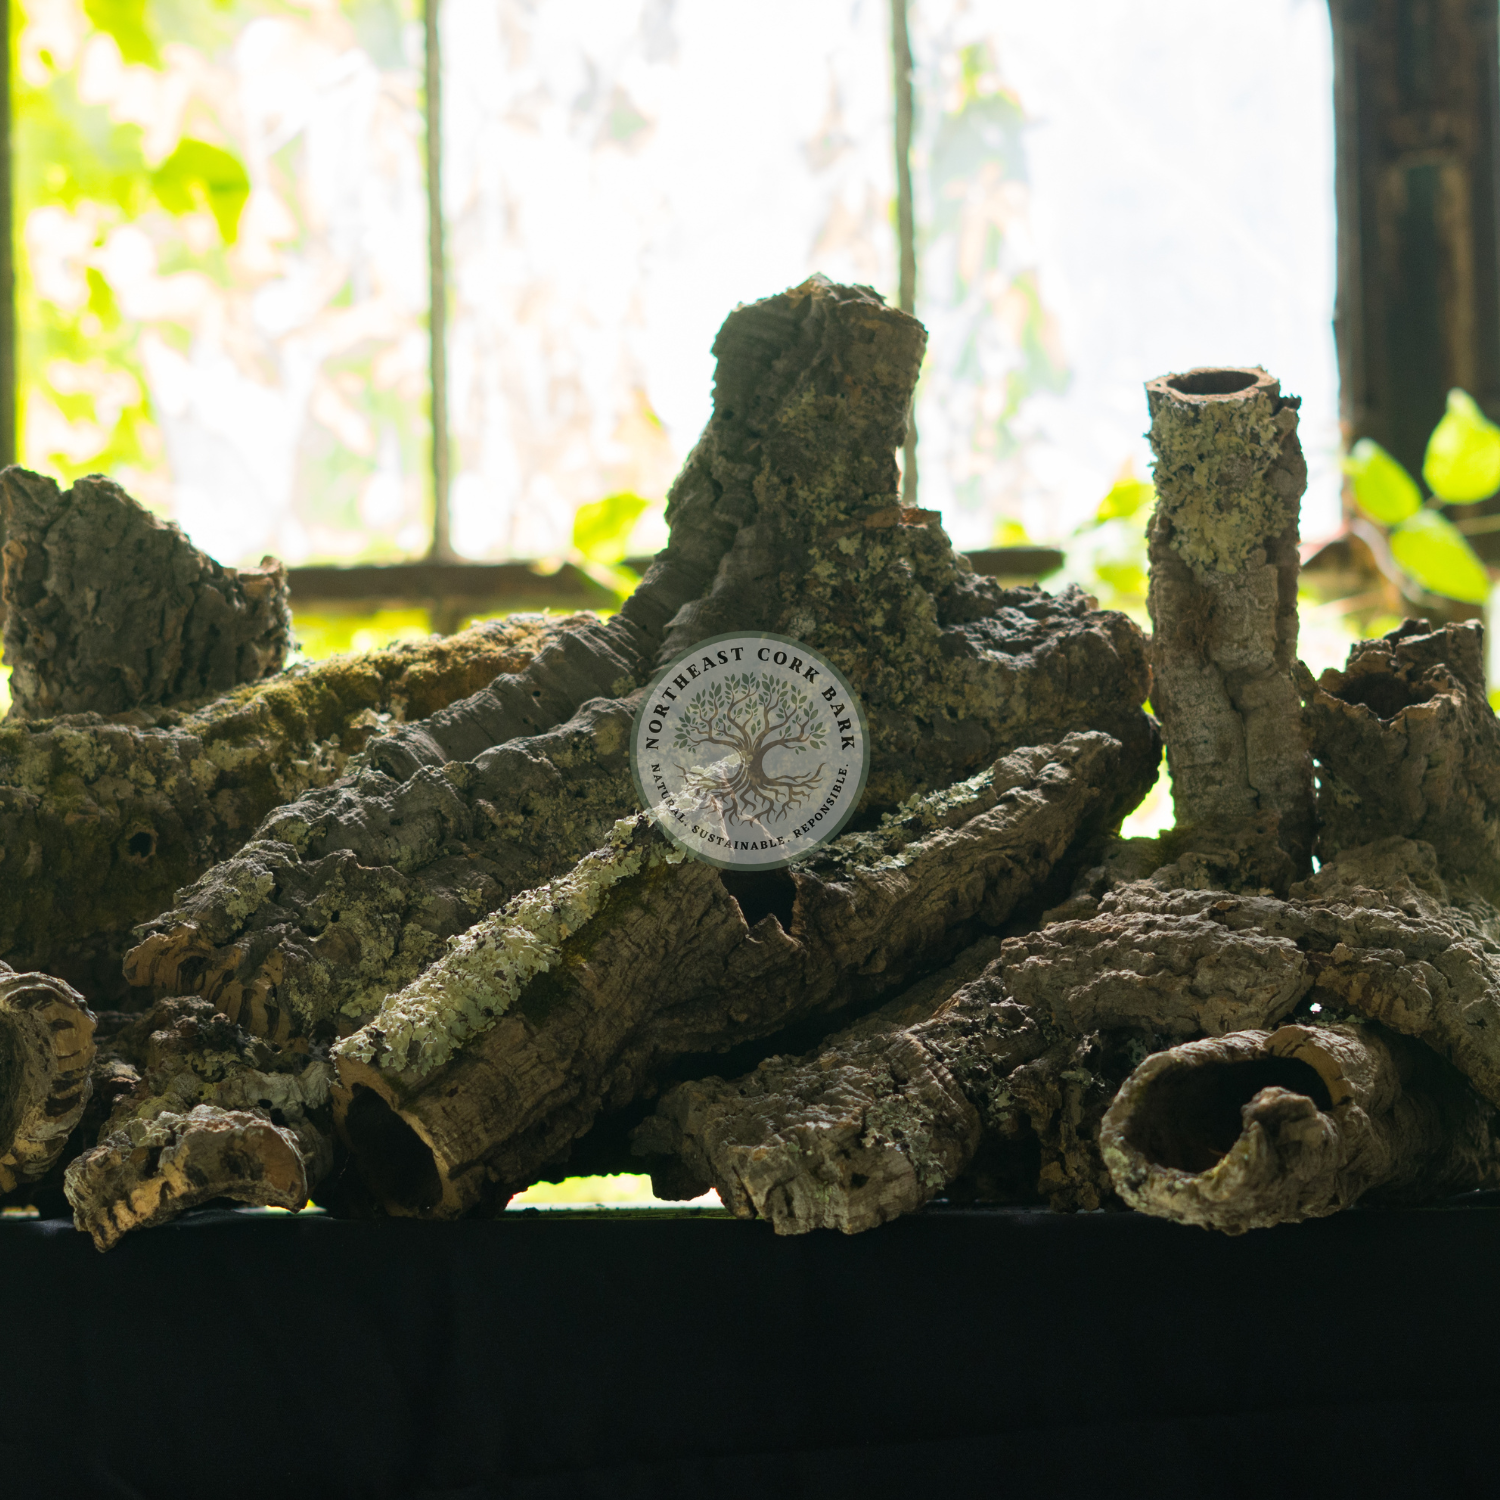 Premium Small to Medium Natural Cork Bark Rounds and Tubes for Reptiles, Vivariums, and More.